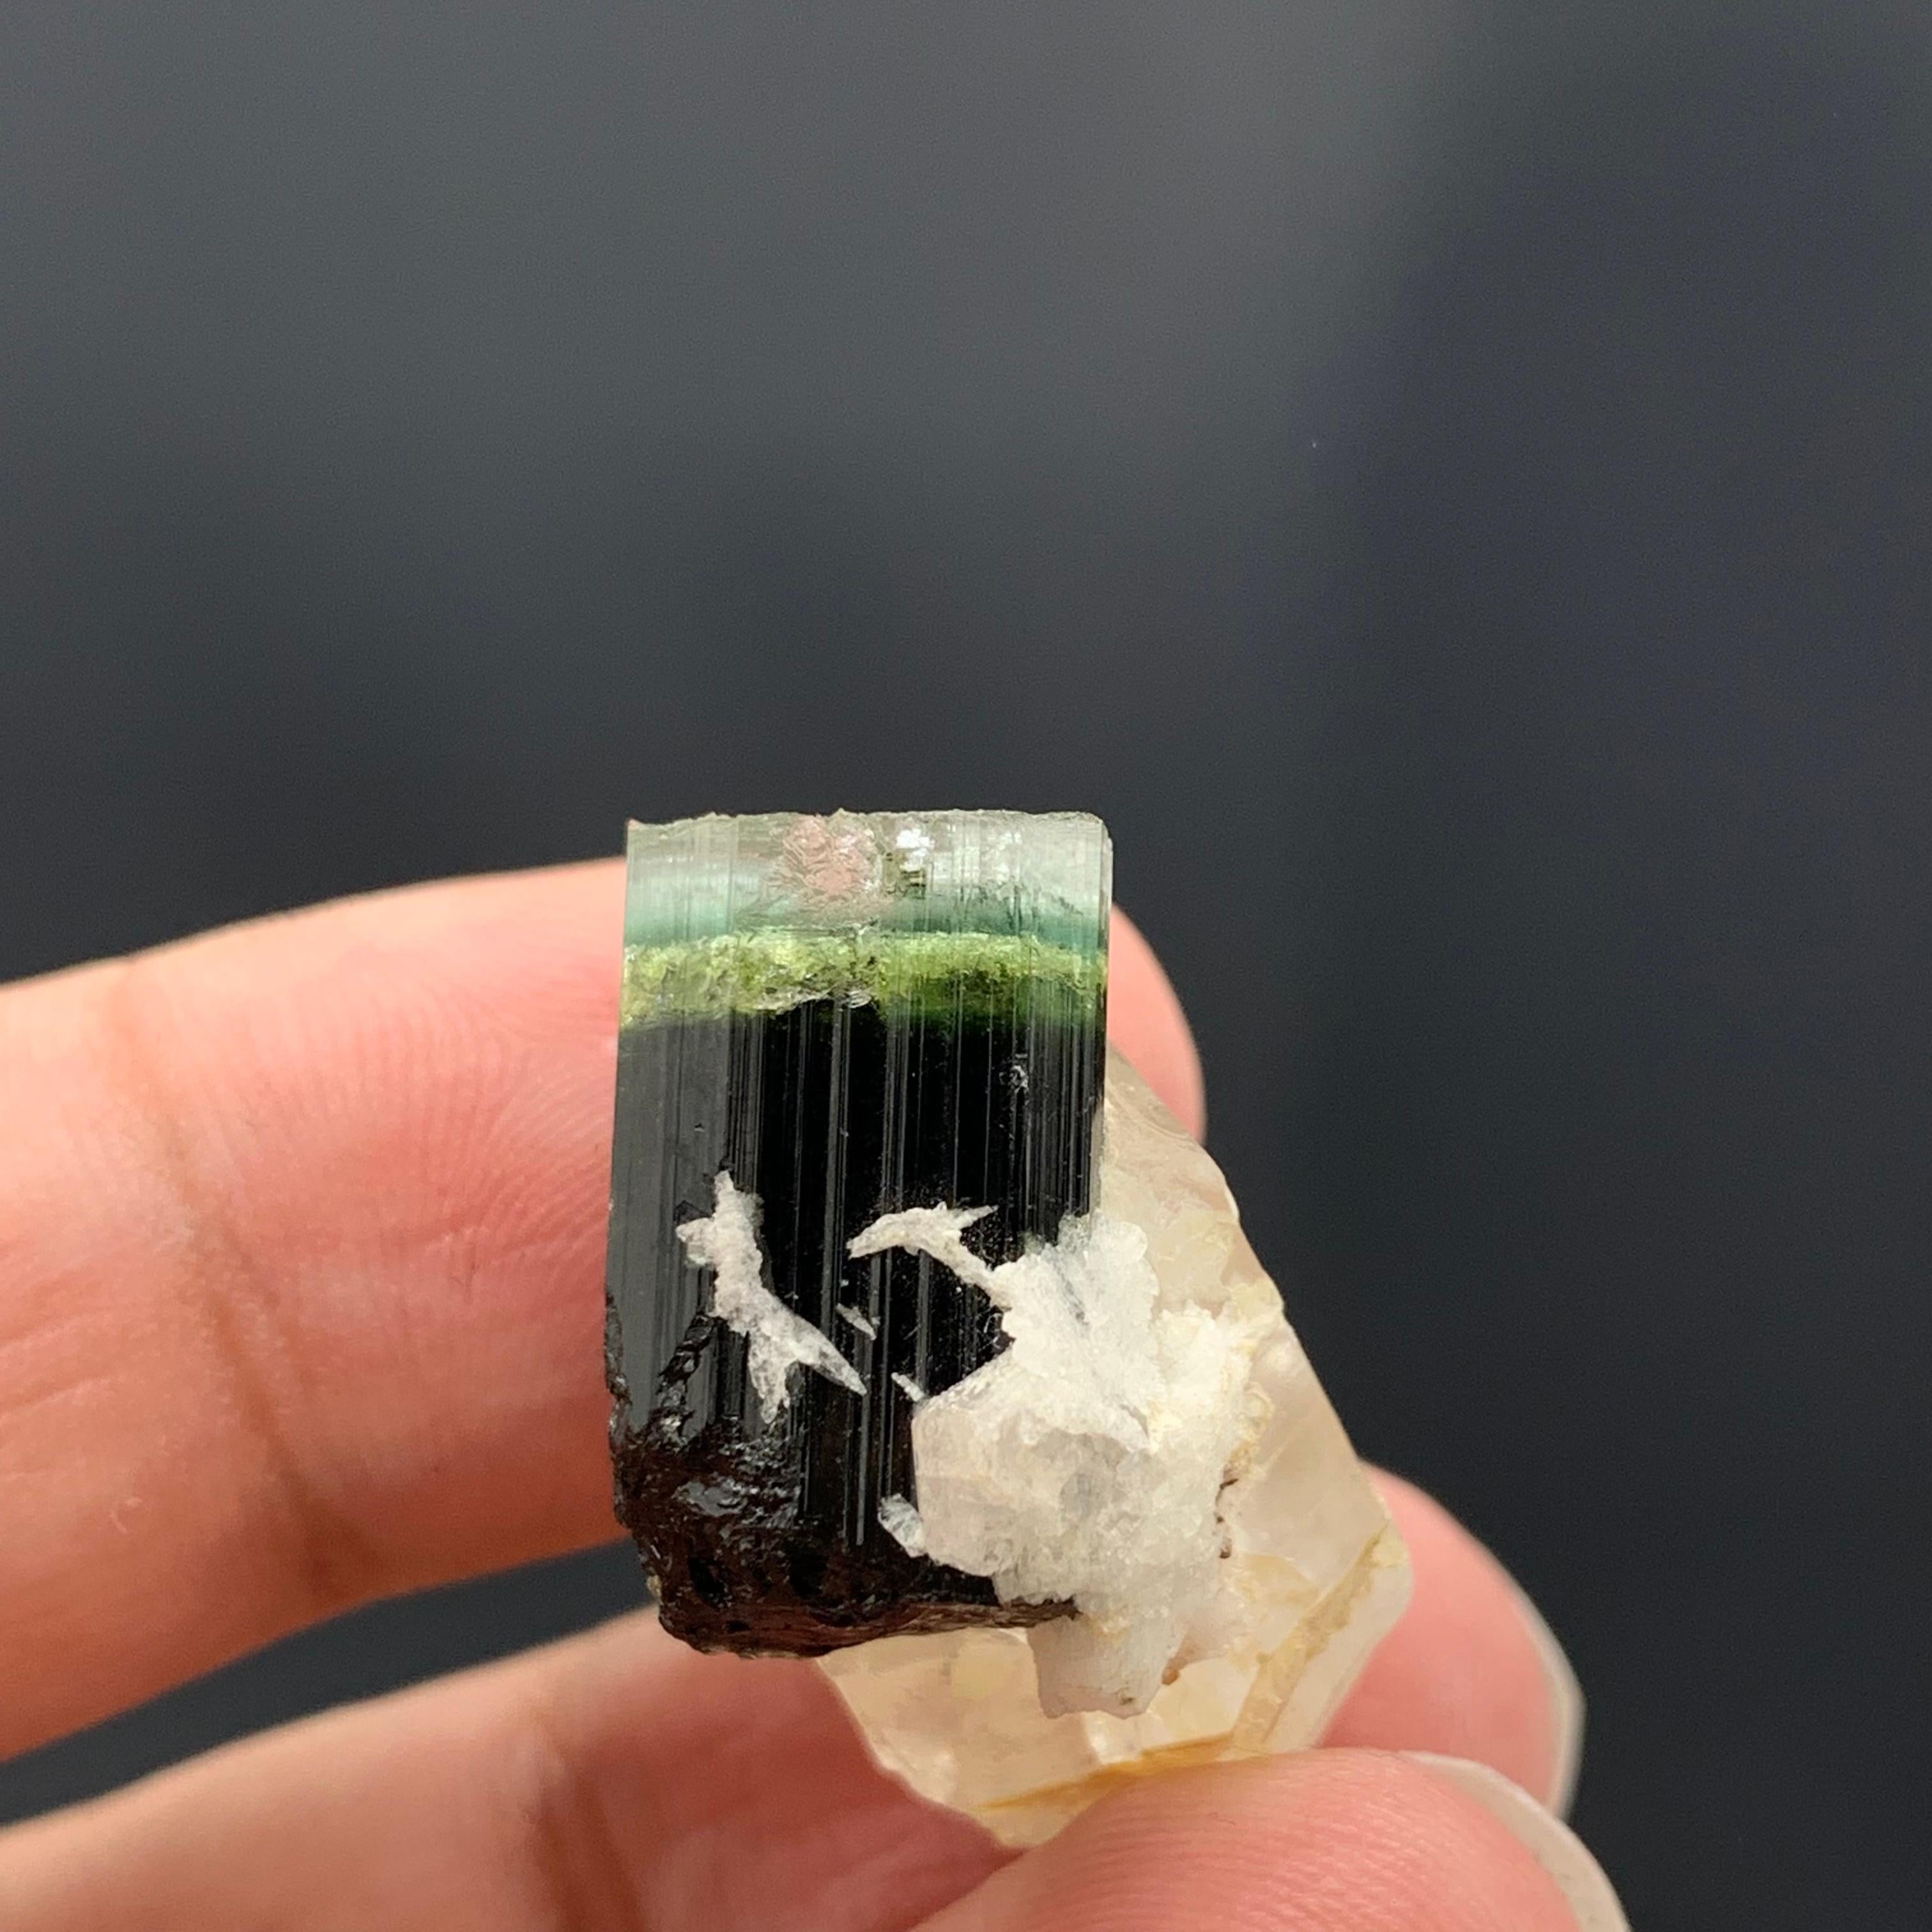 Beautiful Tri Color Tourmaline Specimen with Quartz From Afghanistan 
Weight: 43.15 Carat 
Dim: 1.9 x 2.1 x 1.5 Cm
Origin: Afghanistan 

Tourmaline is a crystalline silicate mineral group in which boron is compounded with elements such as aluminium,